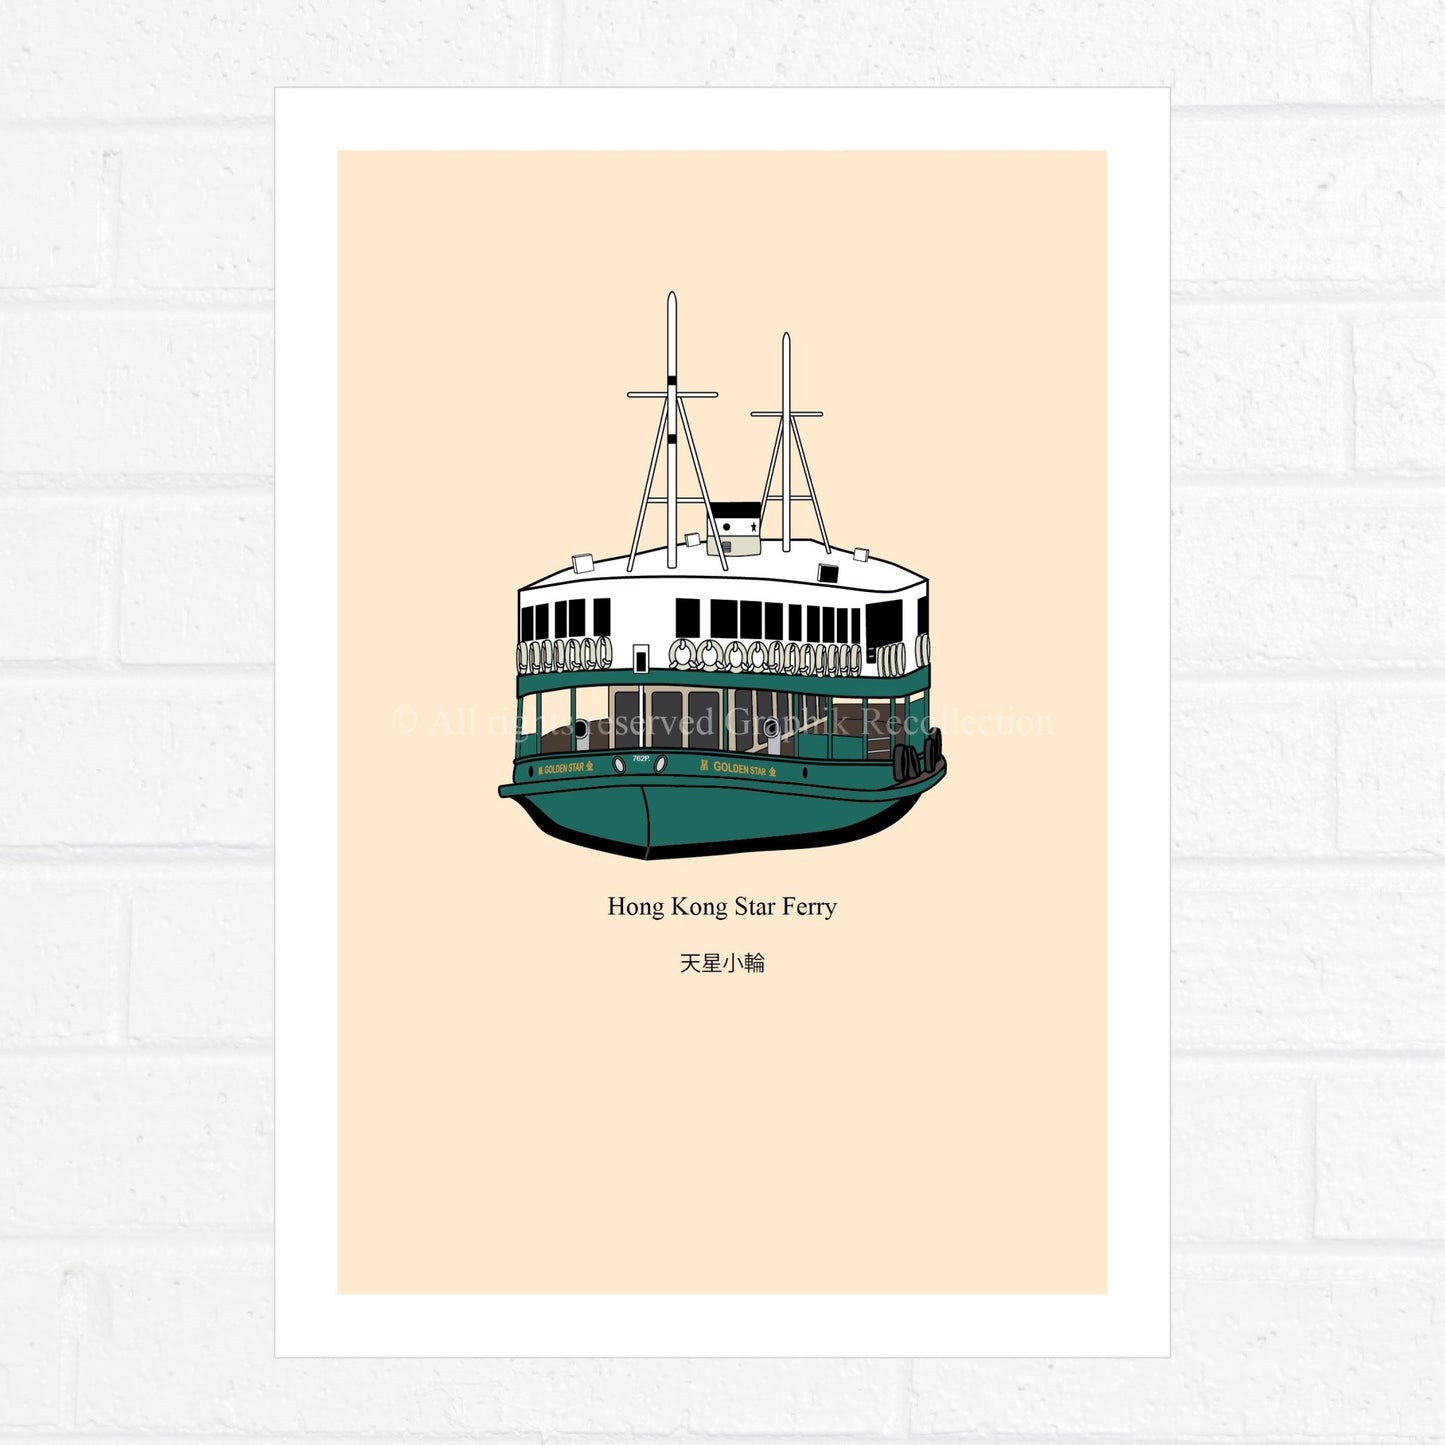 Hong Kong Star Ferry Illustration by Graphik' Re!collection - BetterThanFlowers